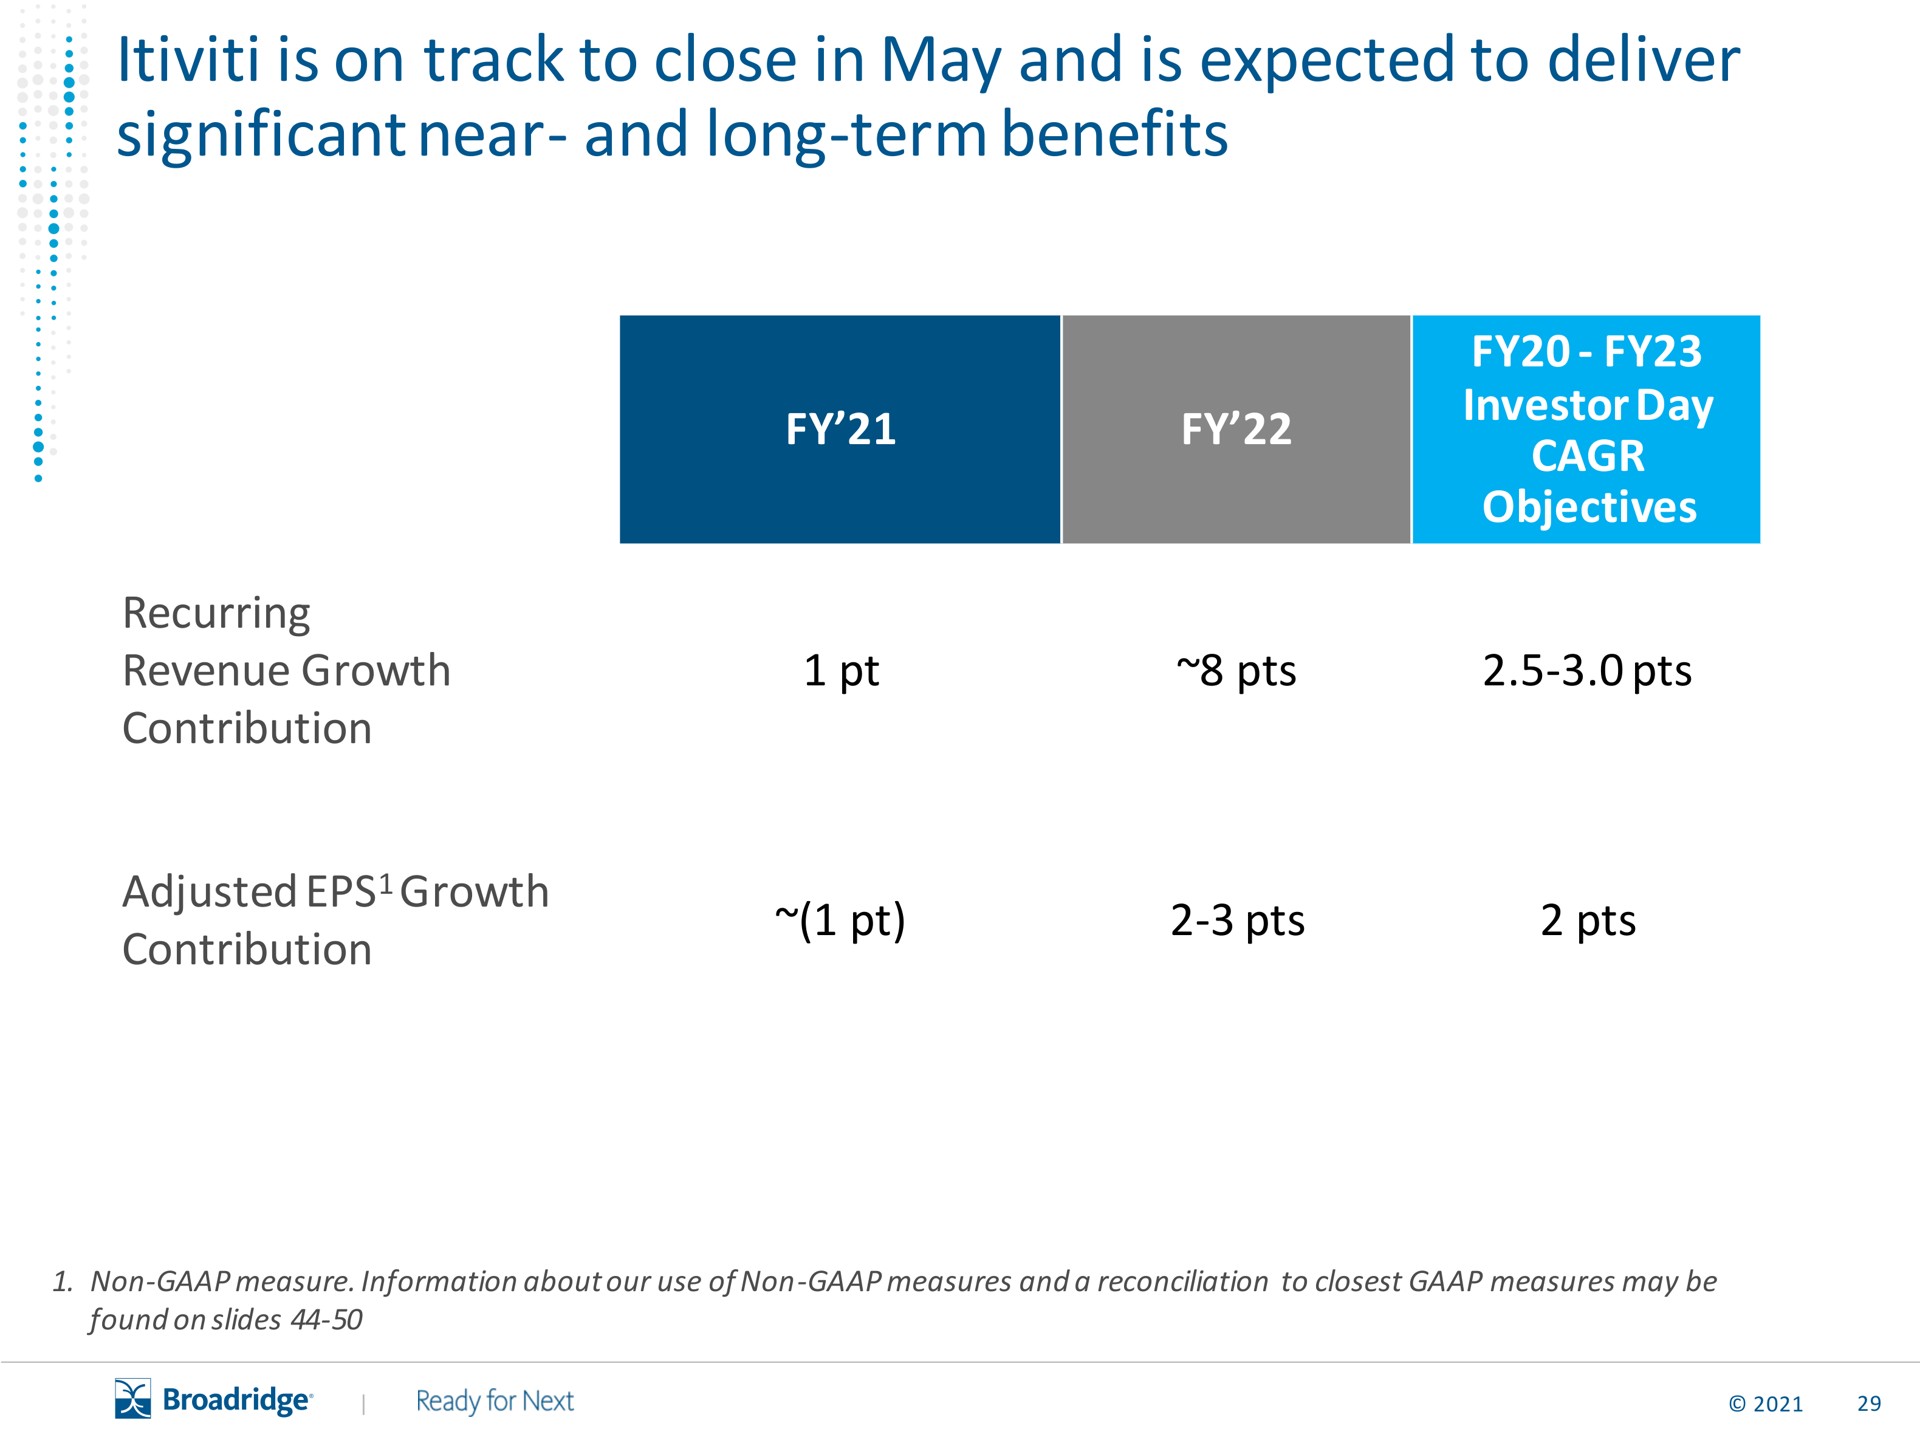 is on track to close in may and is expected to deliver significant near and long term benefits | Broadridge Financial Solutions